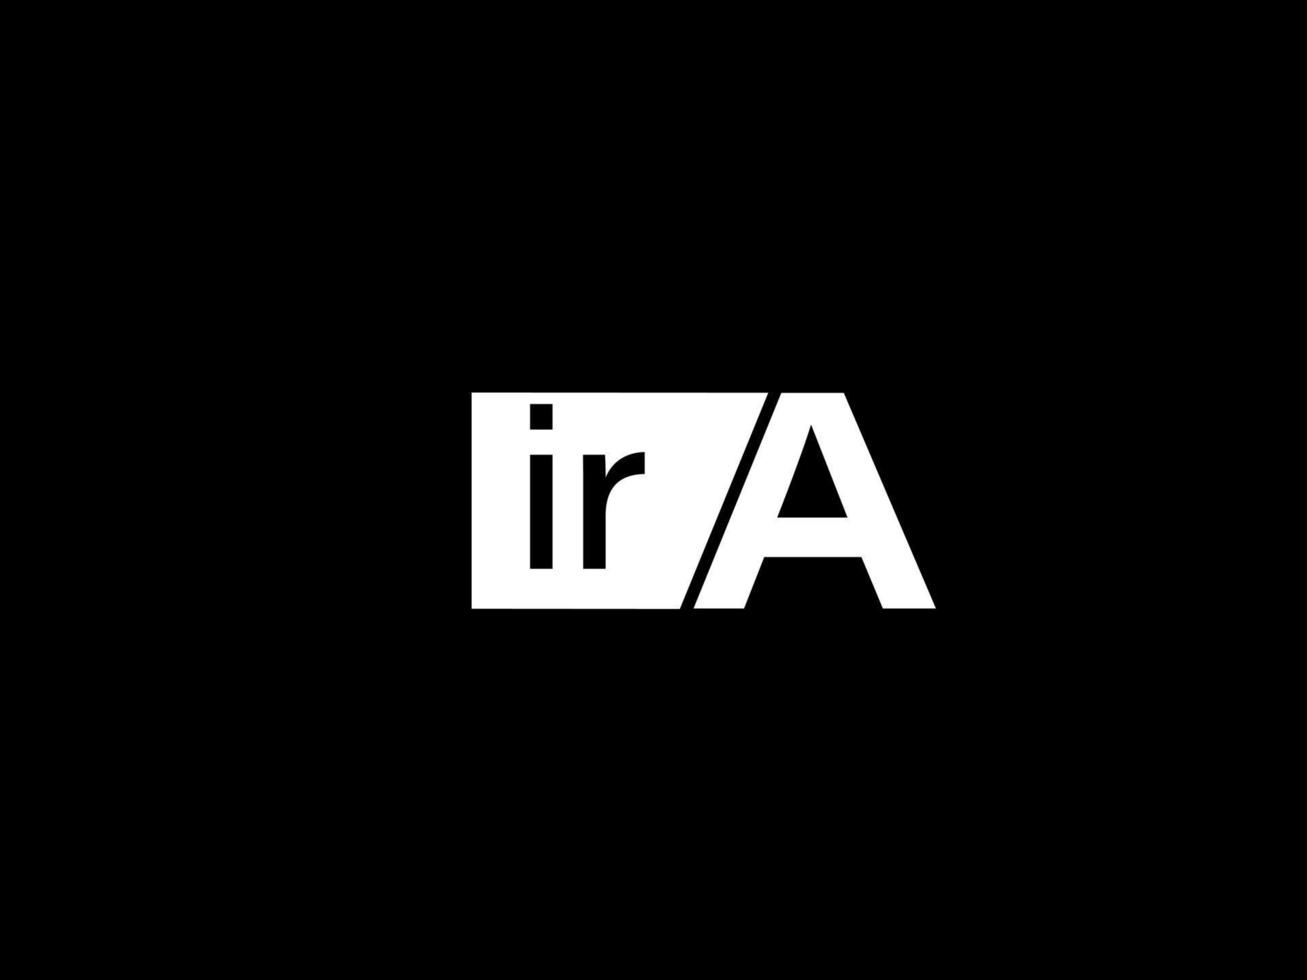 IRA Logo and Graphics design vector art, Icons isolated on black background